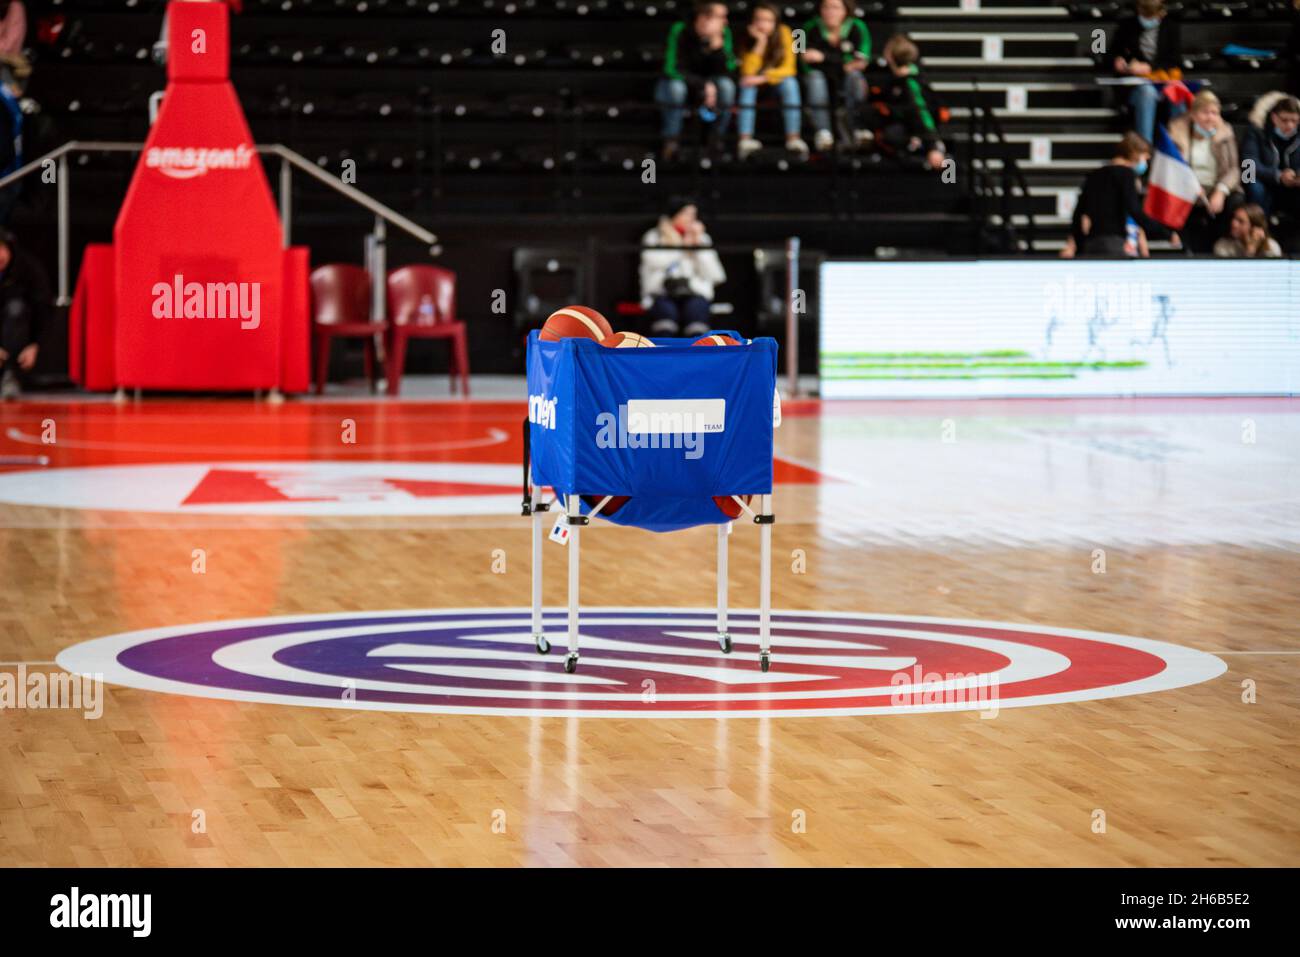 Villeneuve-d'Ascq, France. Nov 14 2021: The Palacium stadium ahead of the FIBA Women's EuroBasket 2023, Qualifiers Group B Basketball match between France and Lithuania on November 14, 2021 at Palacium in Villeneuve-d'Ascq, France - Photo: Melanie Laurent/DPPI/LiveMedia Credit: Independent Photo Agency/Alamy Live News Stock Photo